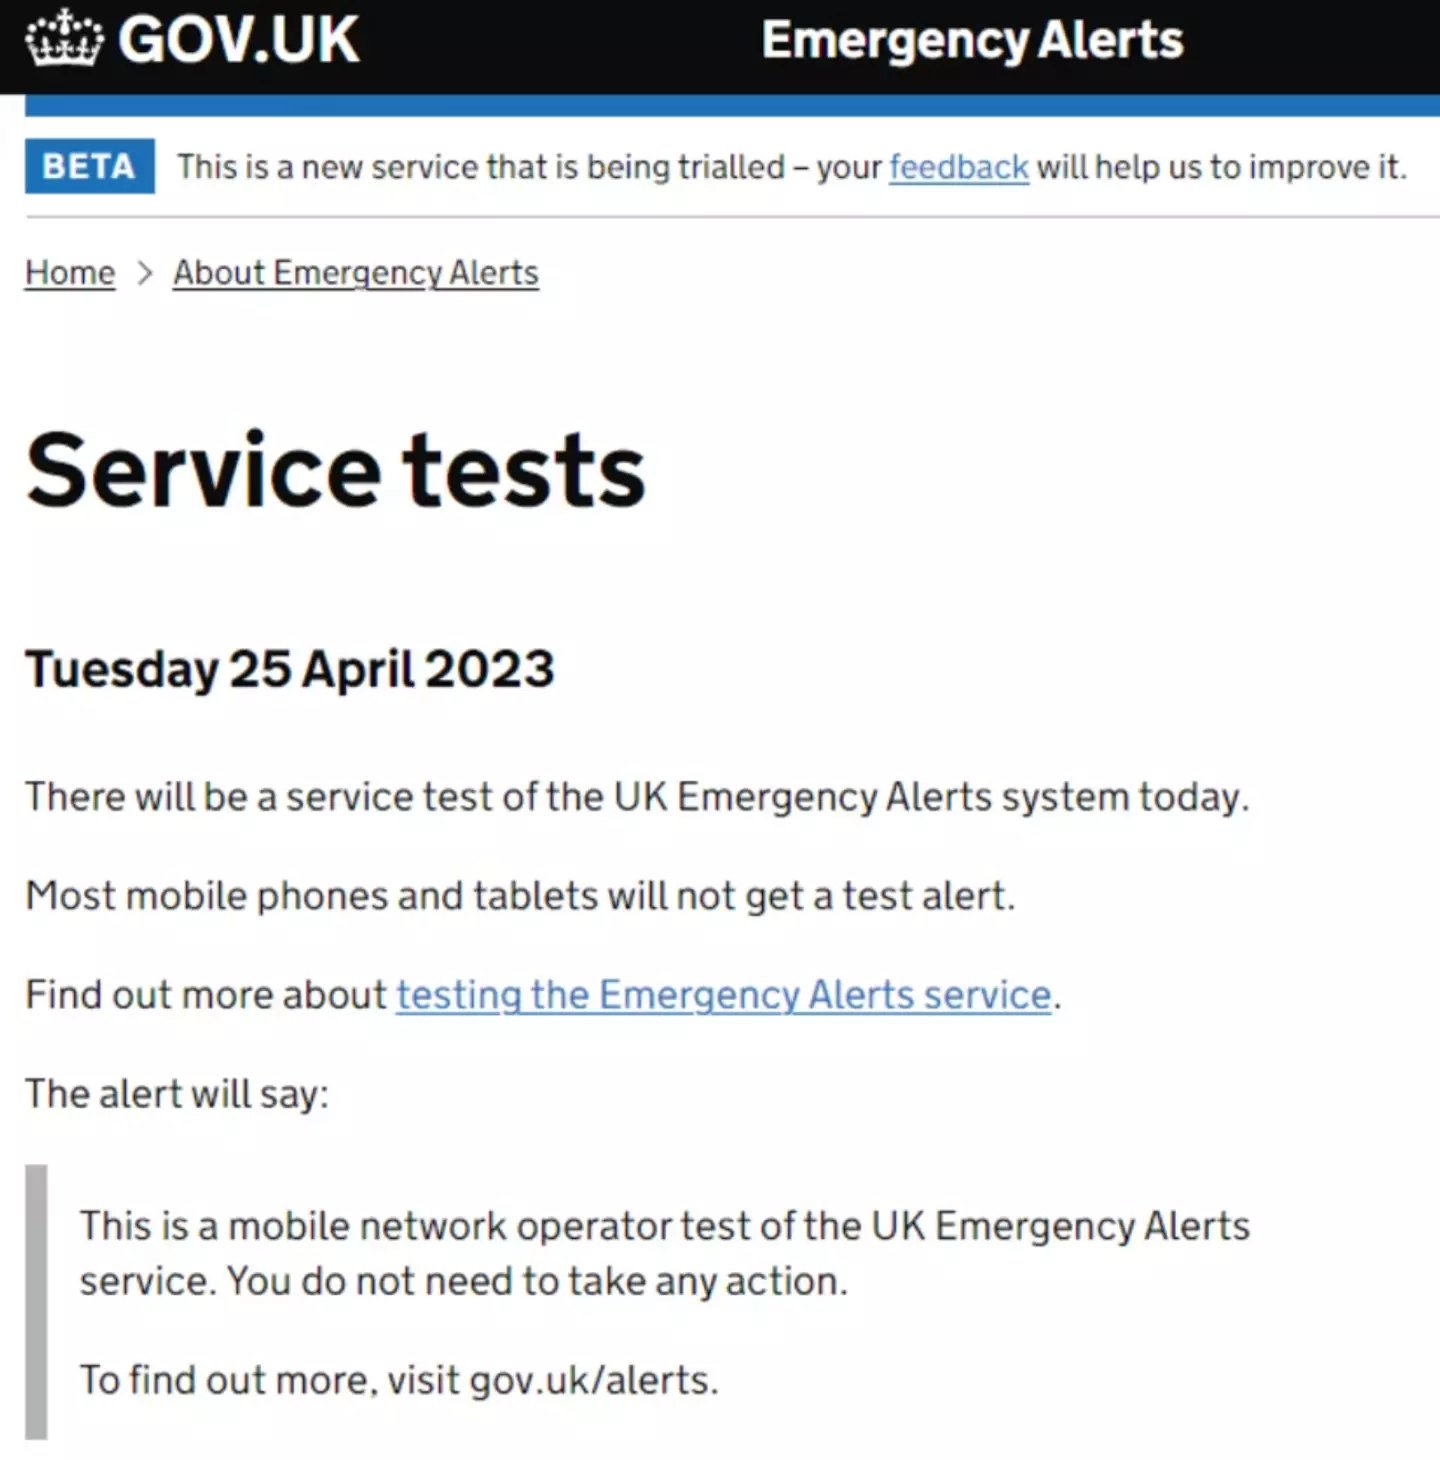 The notice was titled ‘Tuesday 25 April 2023’.